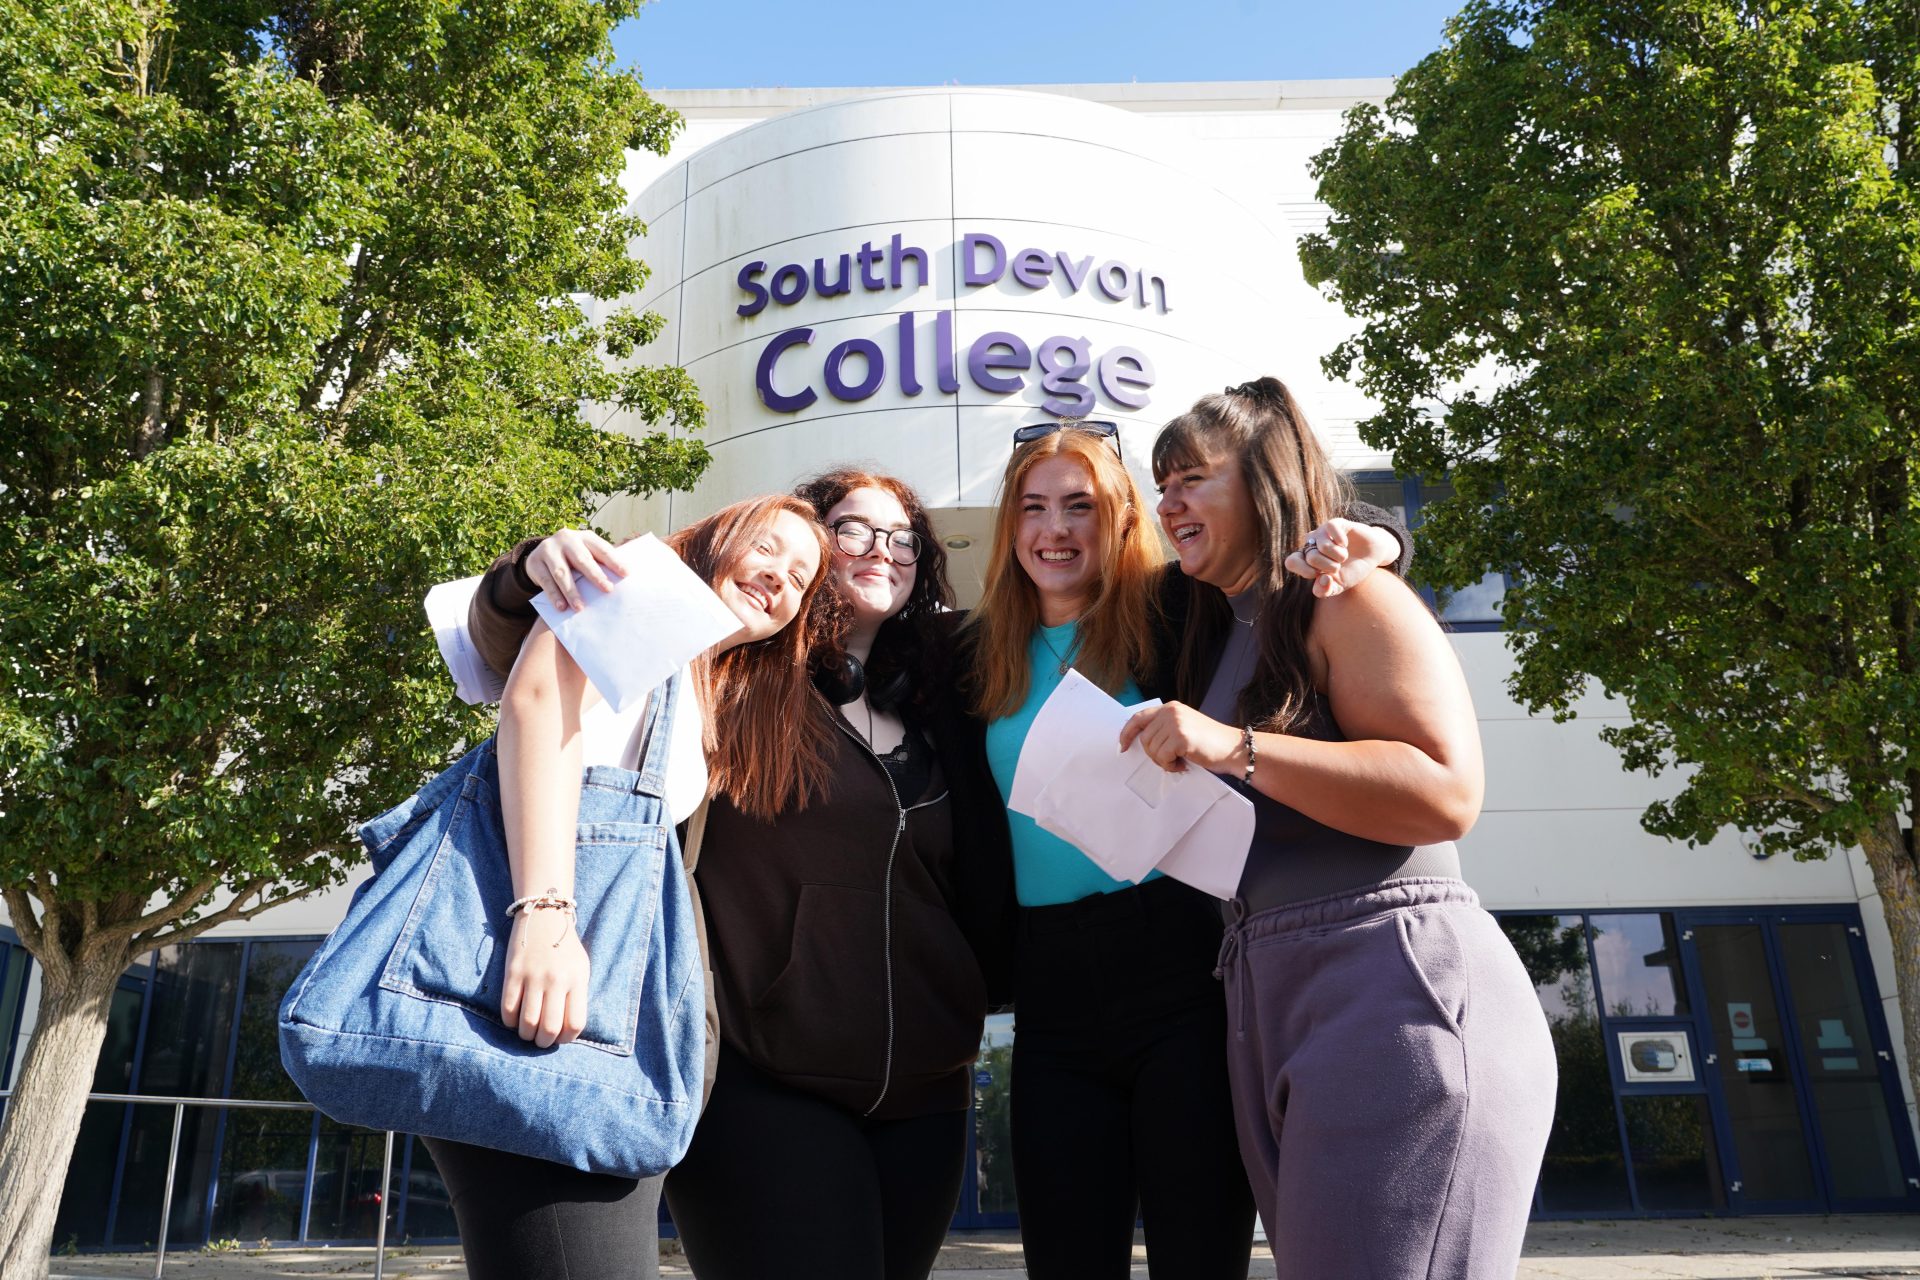 Group of students celebrating on results day outside South Devon College